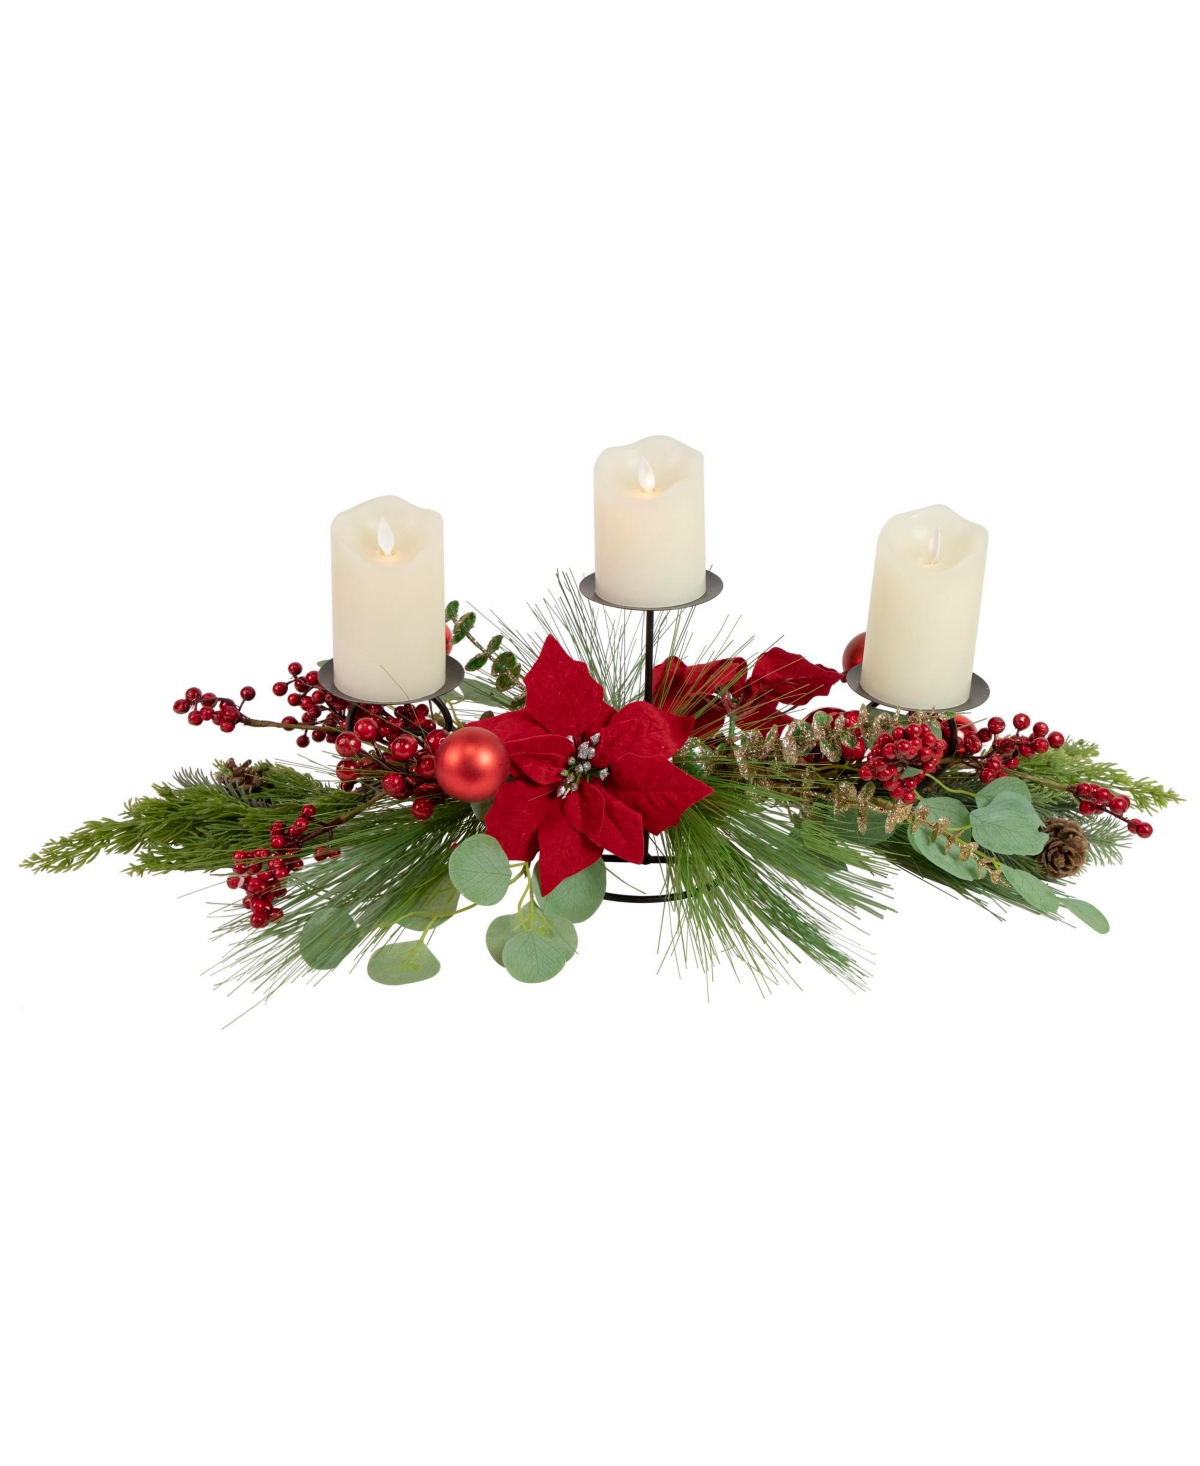 Northlight Triple Candle Holder With Berry And Poinsettia Christmas Decor, 32" In Black